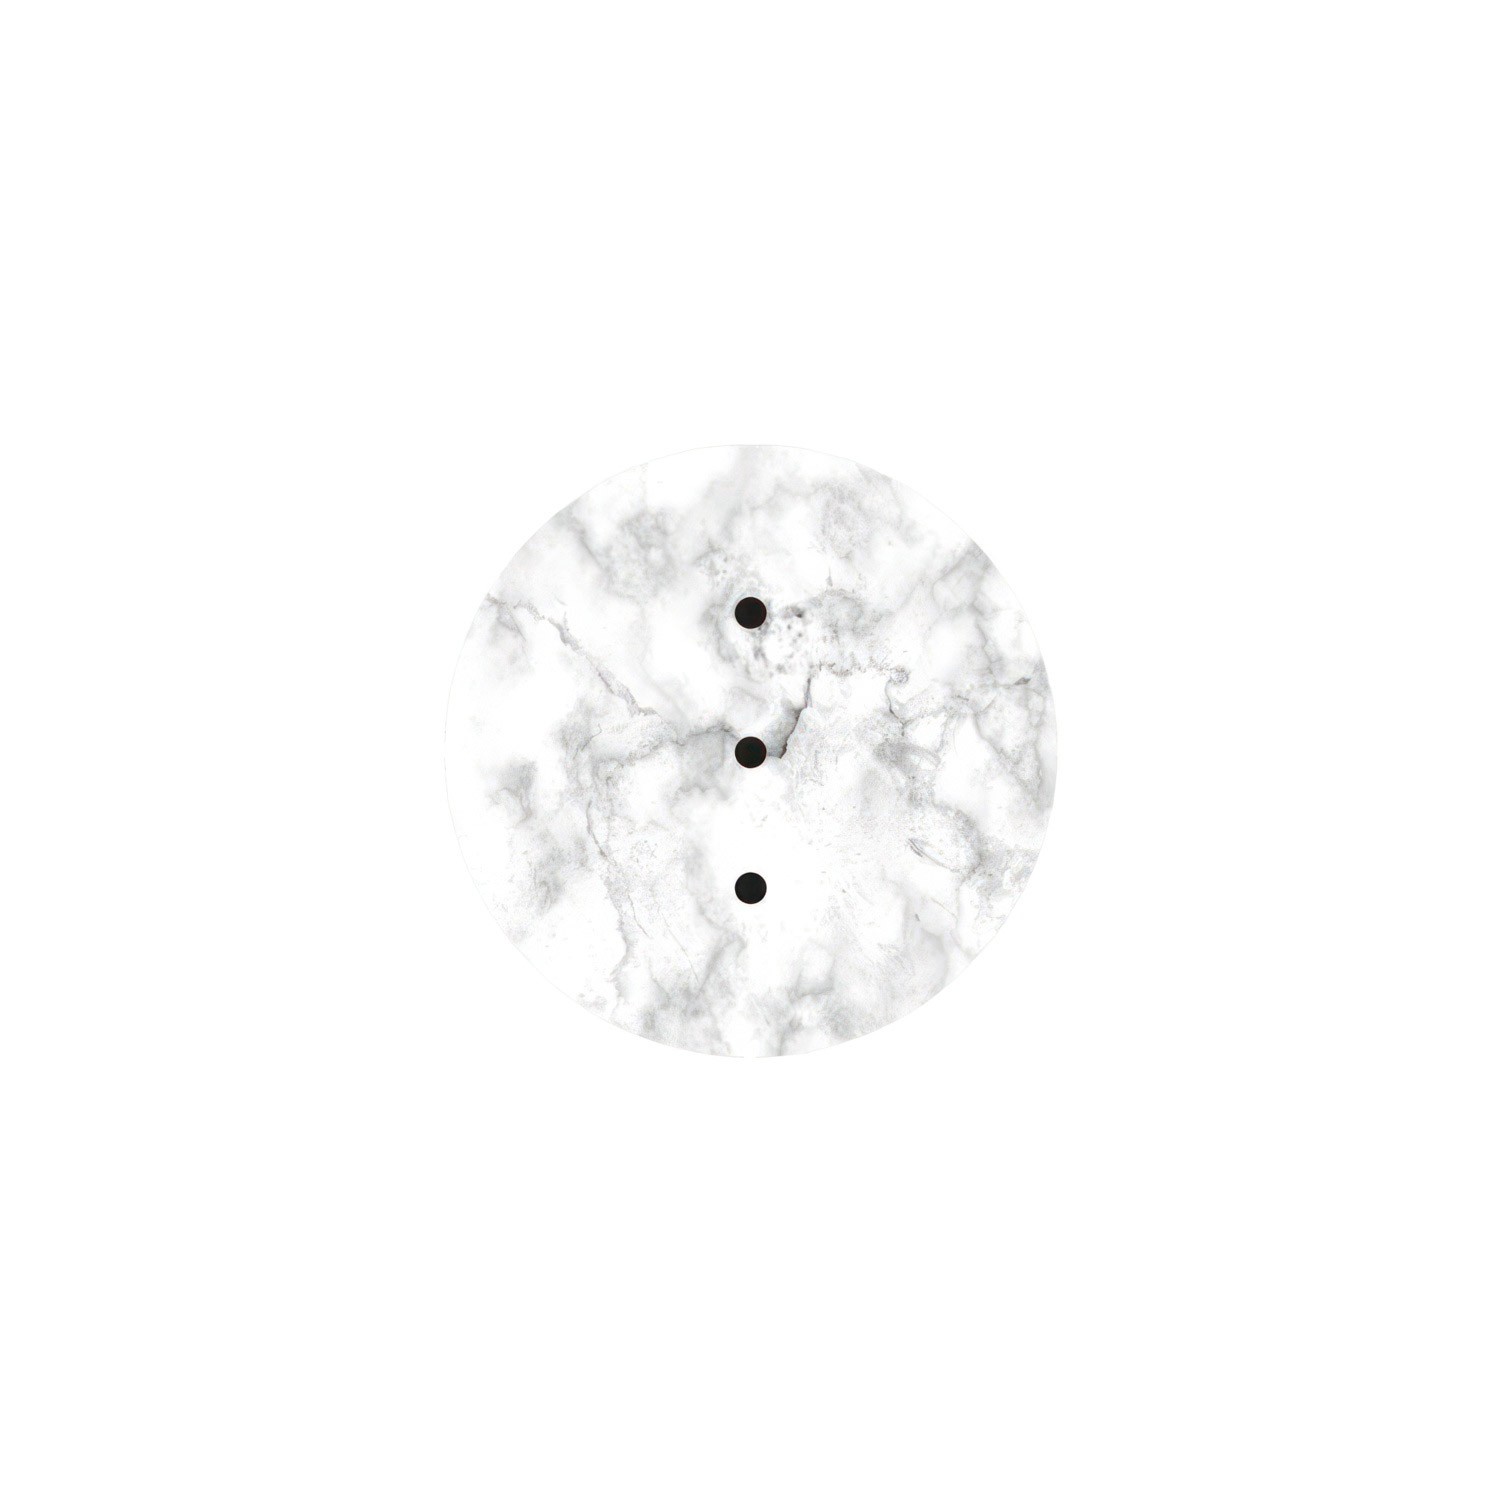 Round Rose-One 3 in-line holes and 4 side holes ceiling rose, 200 mm